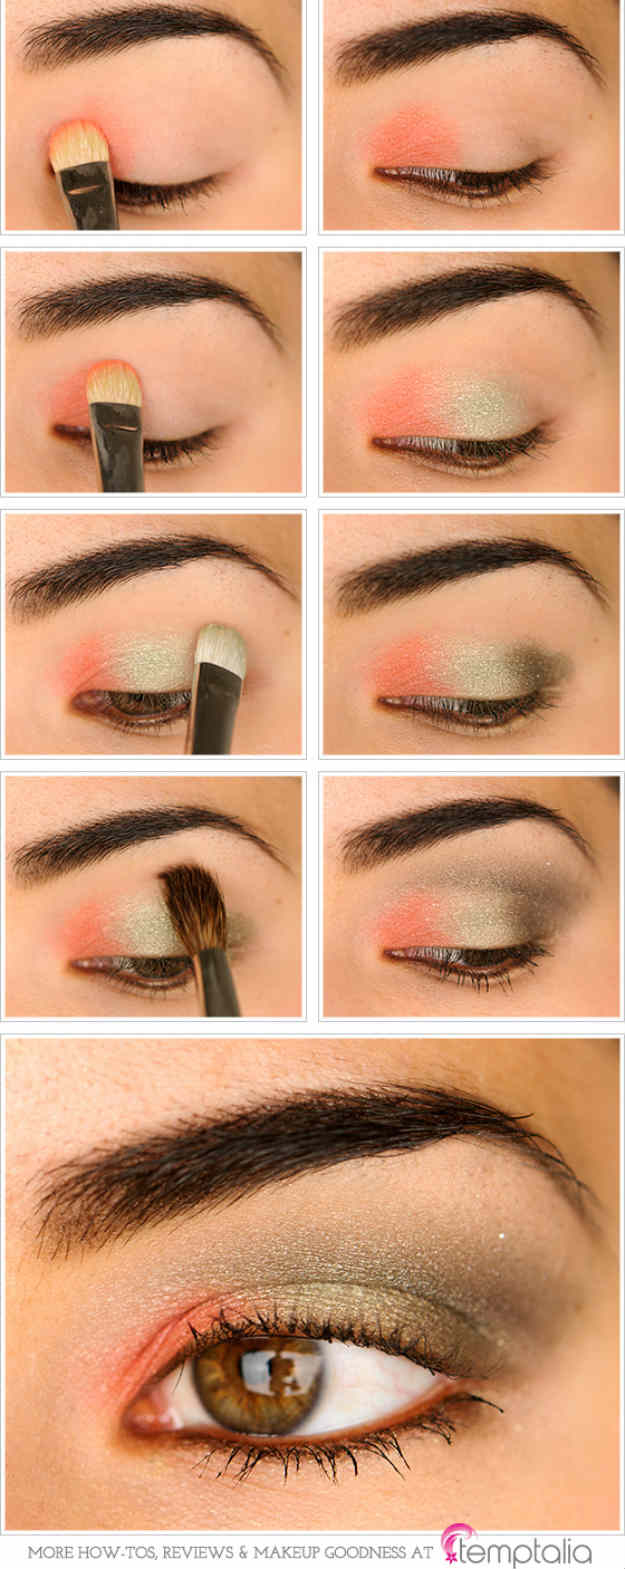 How To Do Eye Makeup For Brown Eyes Eye Shadow For Brown Eyes Makeup Tutorials Guide Estheticnet